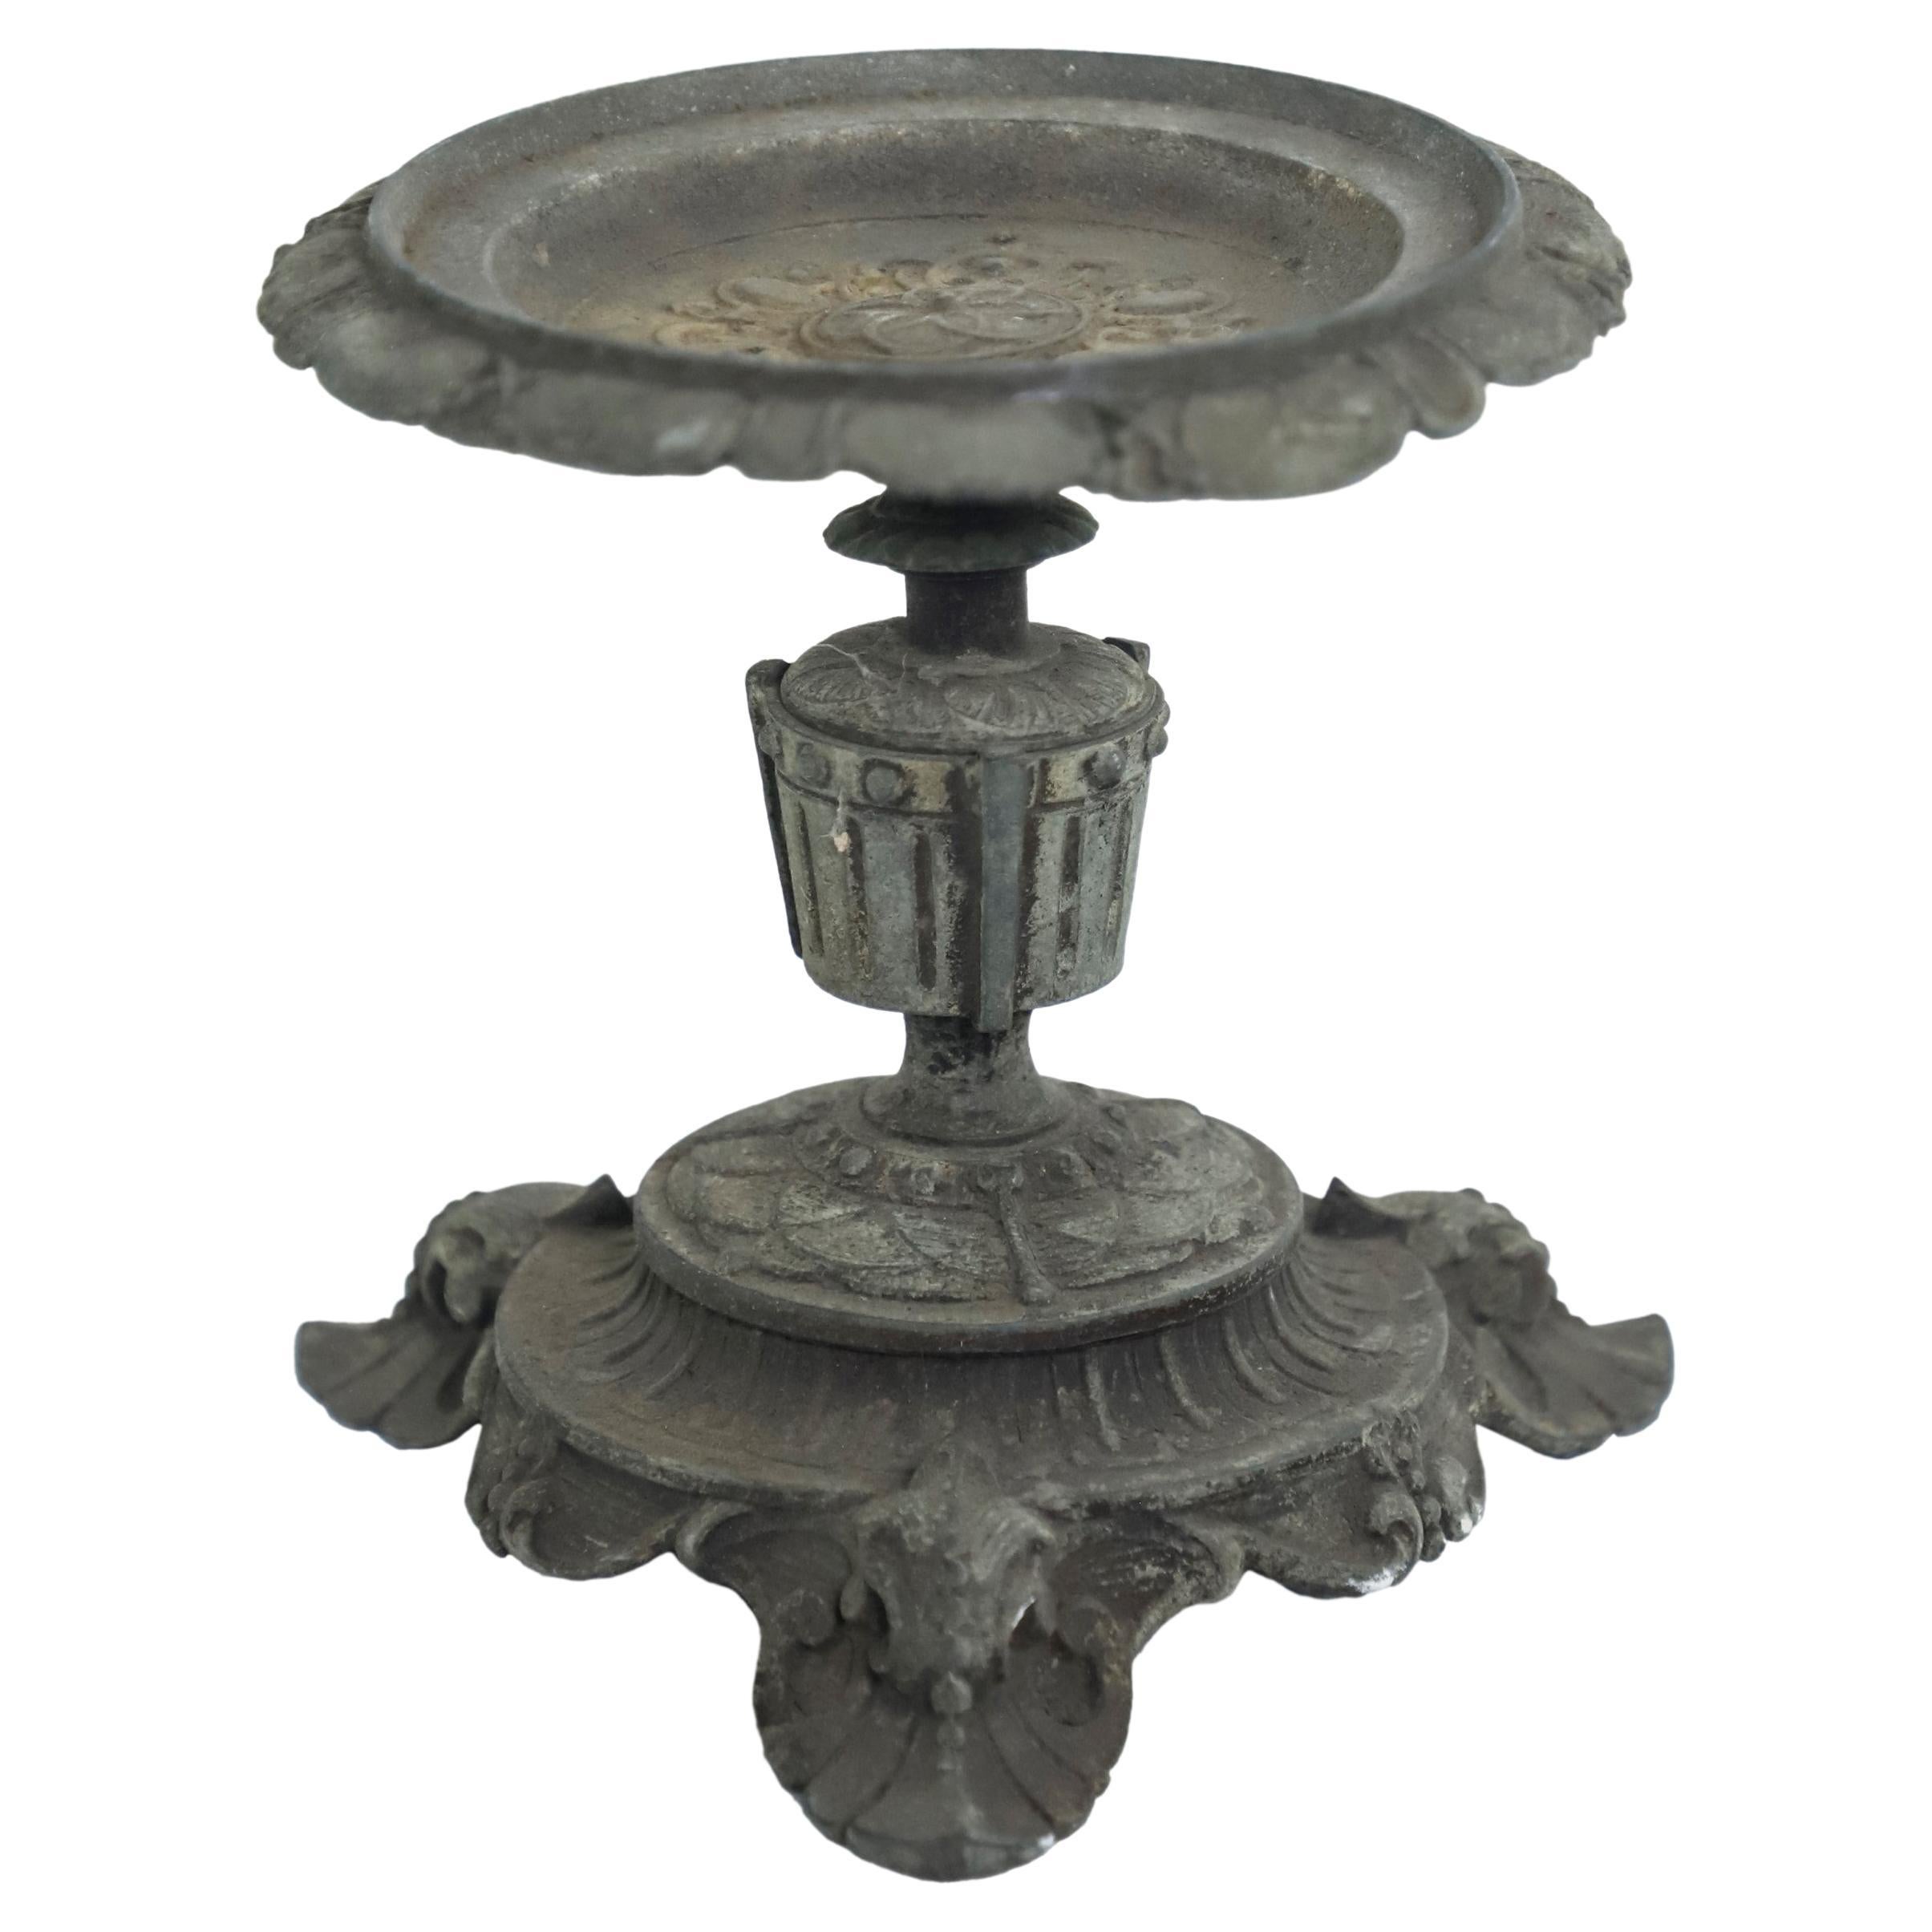 Antique Small Single French Oil Lamp Stand or Planter For Sale